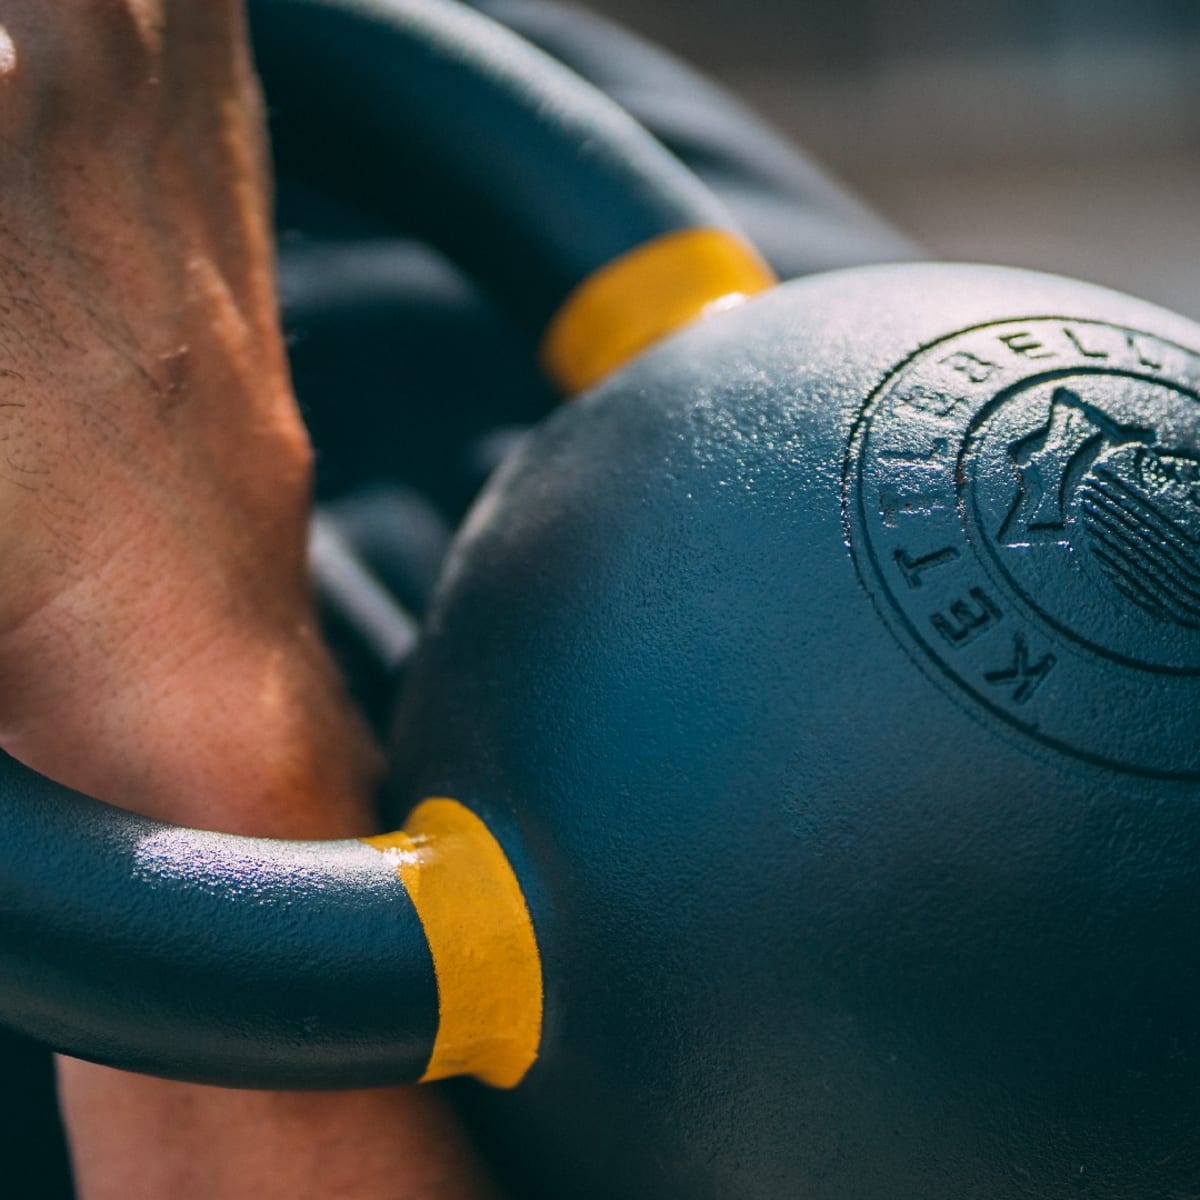 Kettlebell Weight: How to Choose the Load | Men's - Men's Journal